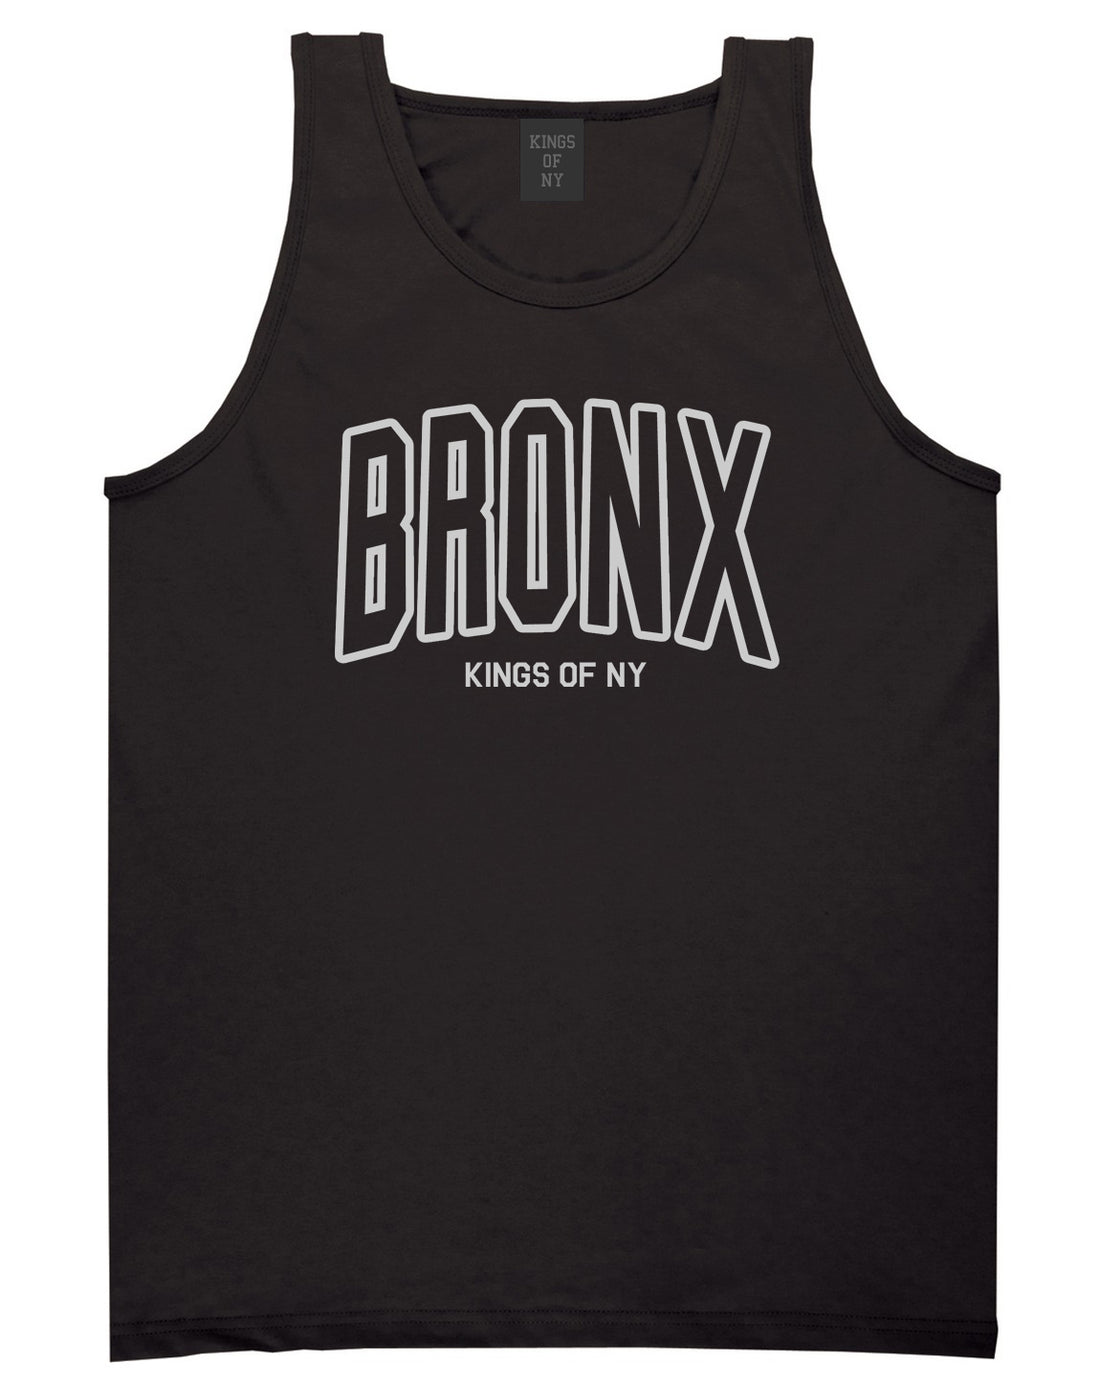 BRONX College Outline Mens Tank Top Shirt Black by Kings Of NY